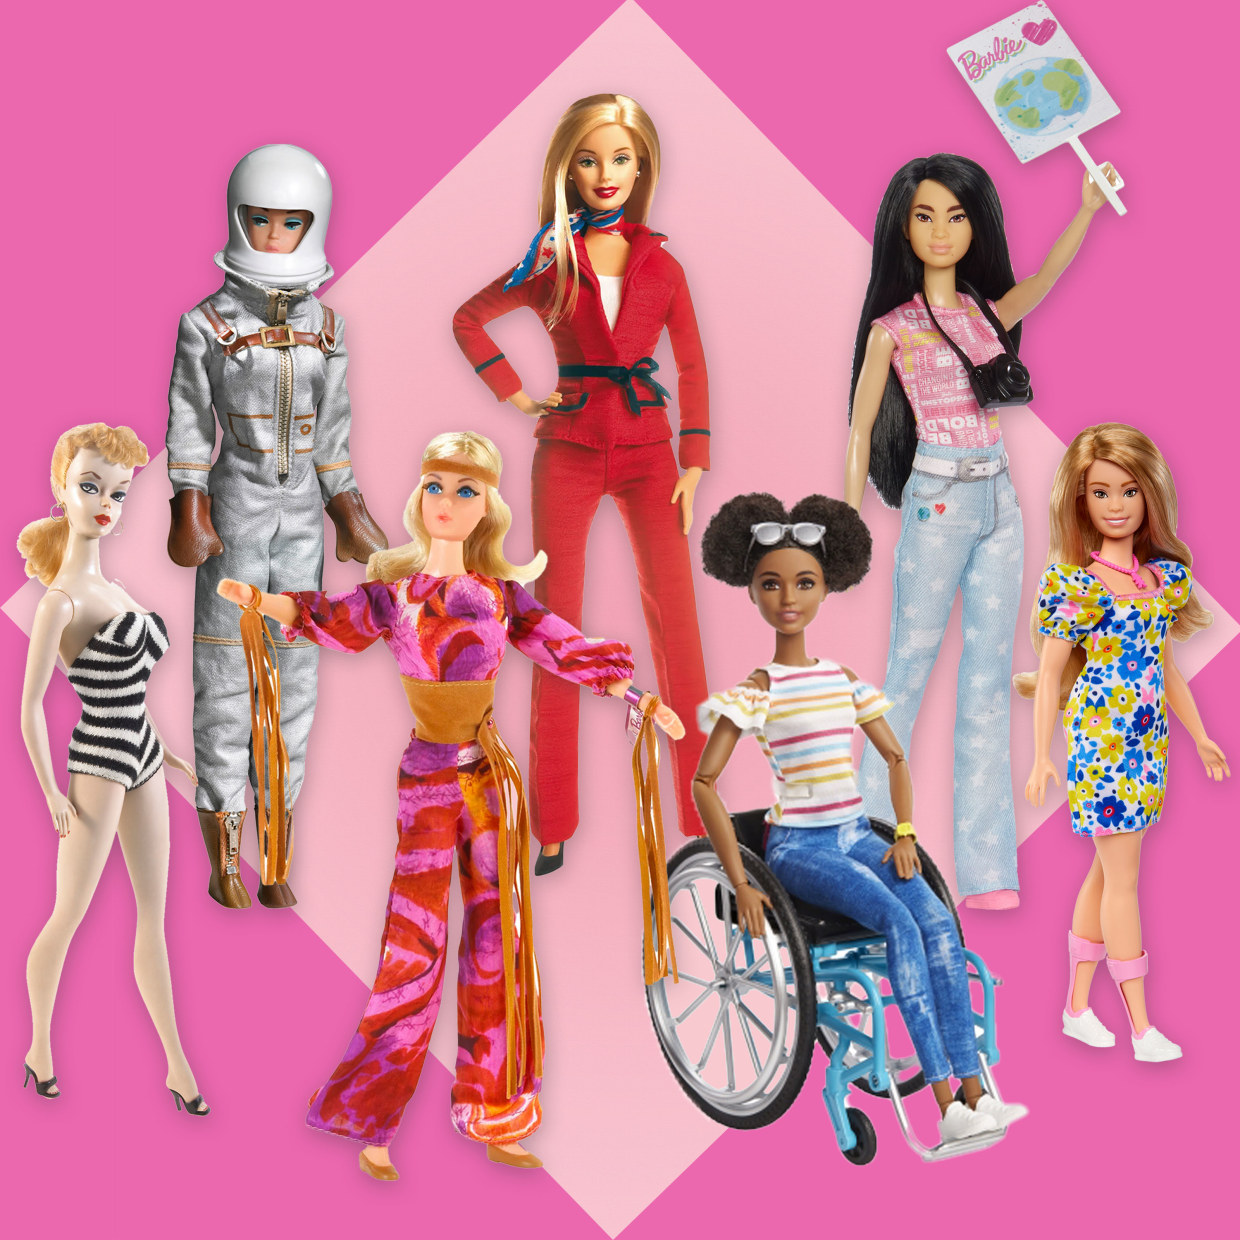 types of barbies to dress up as